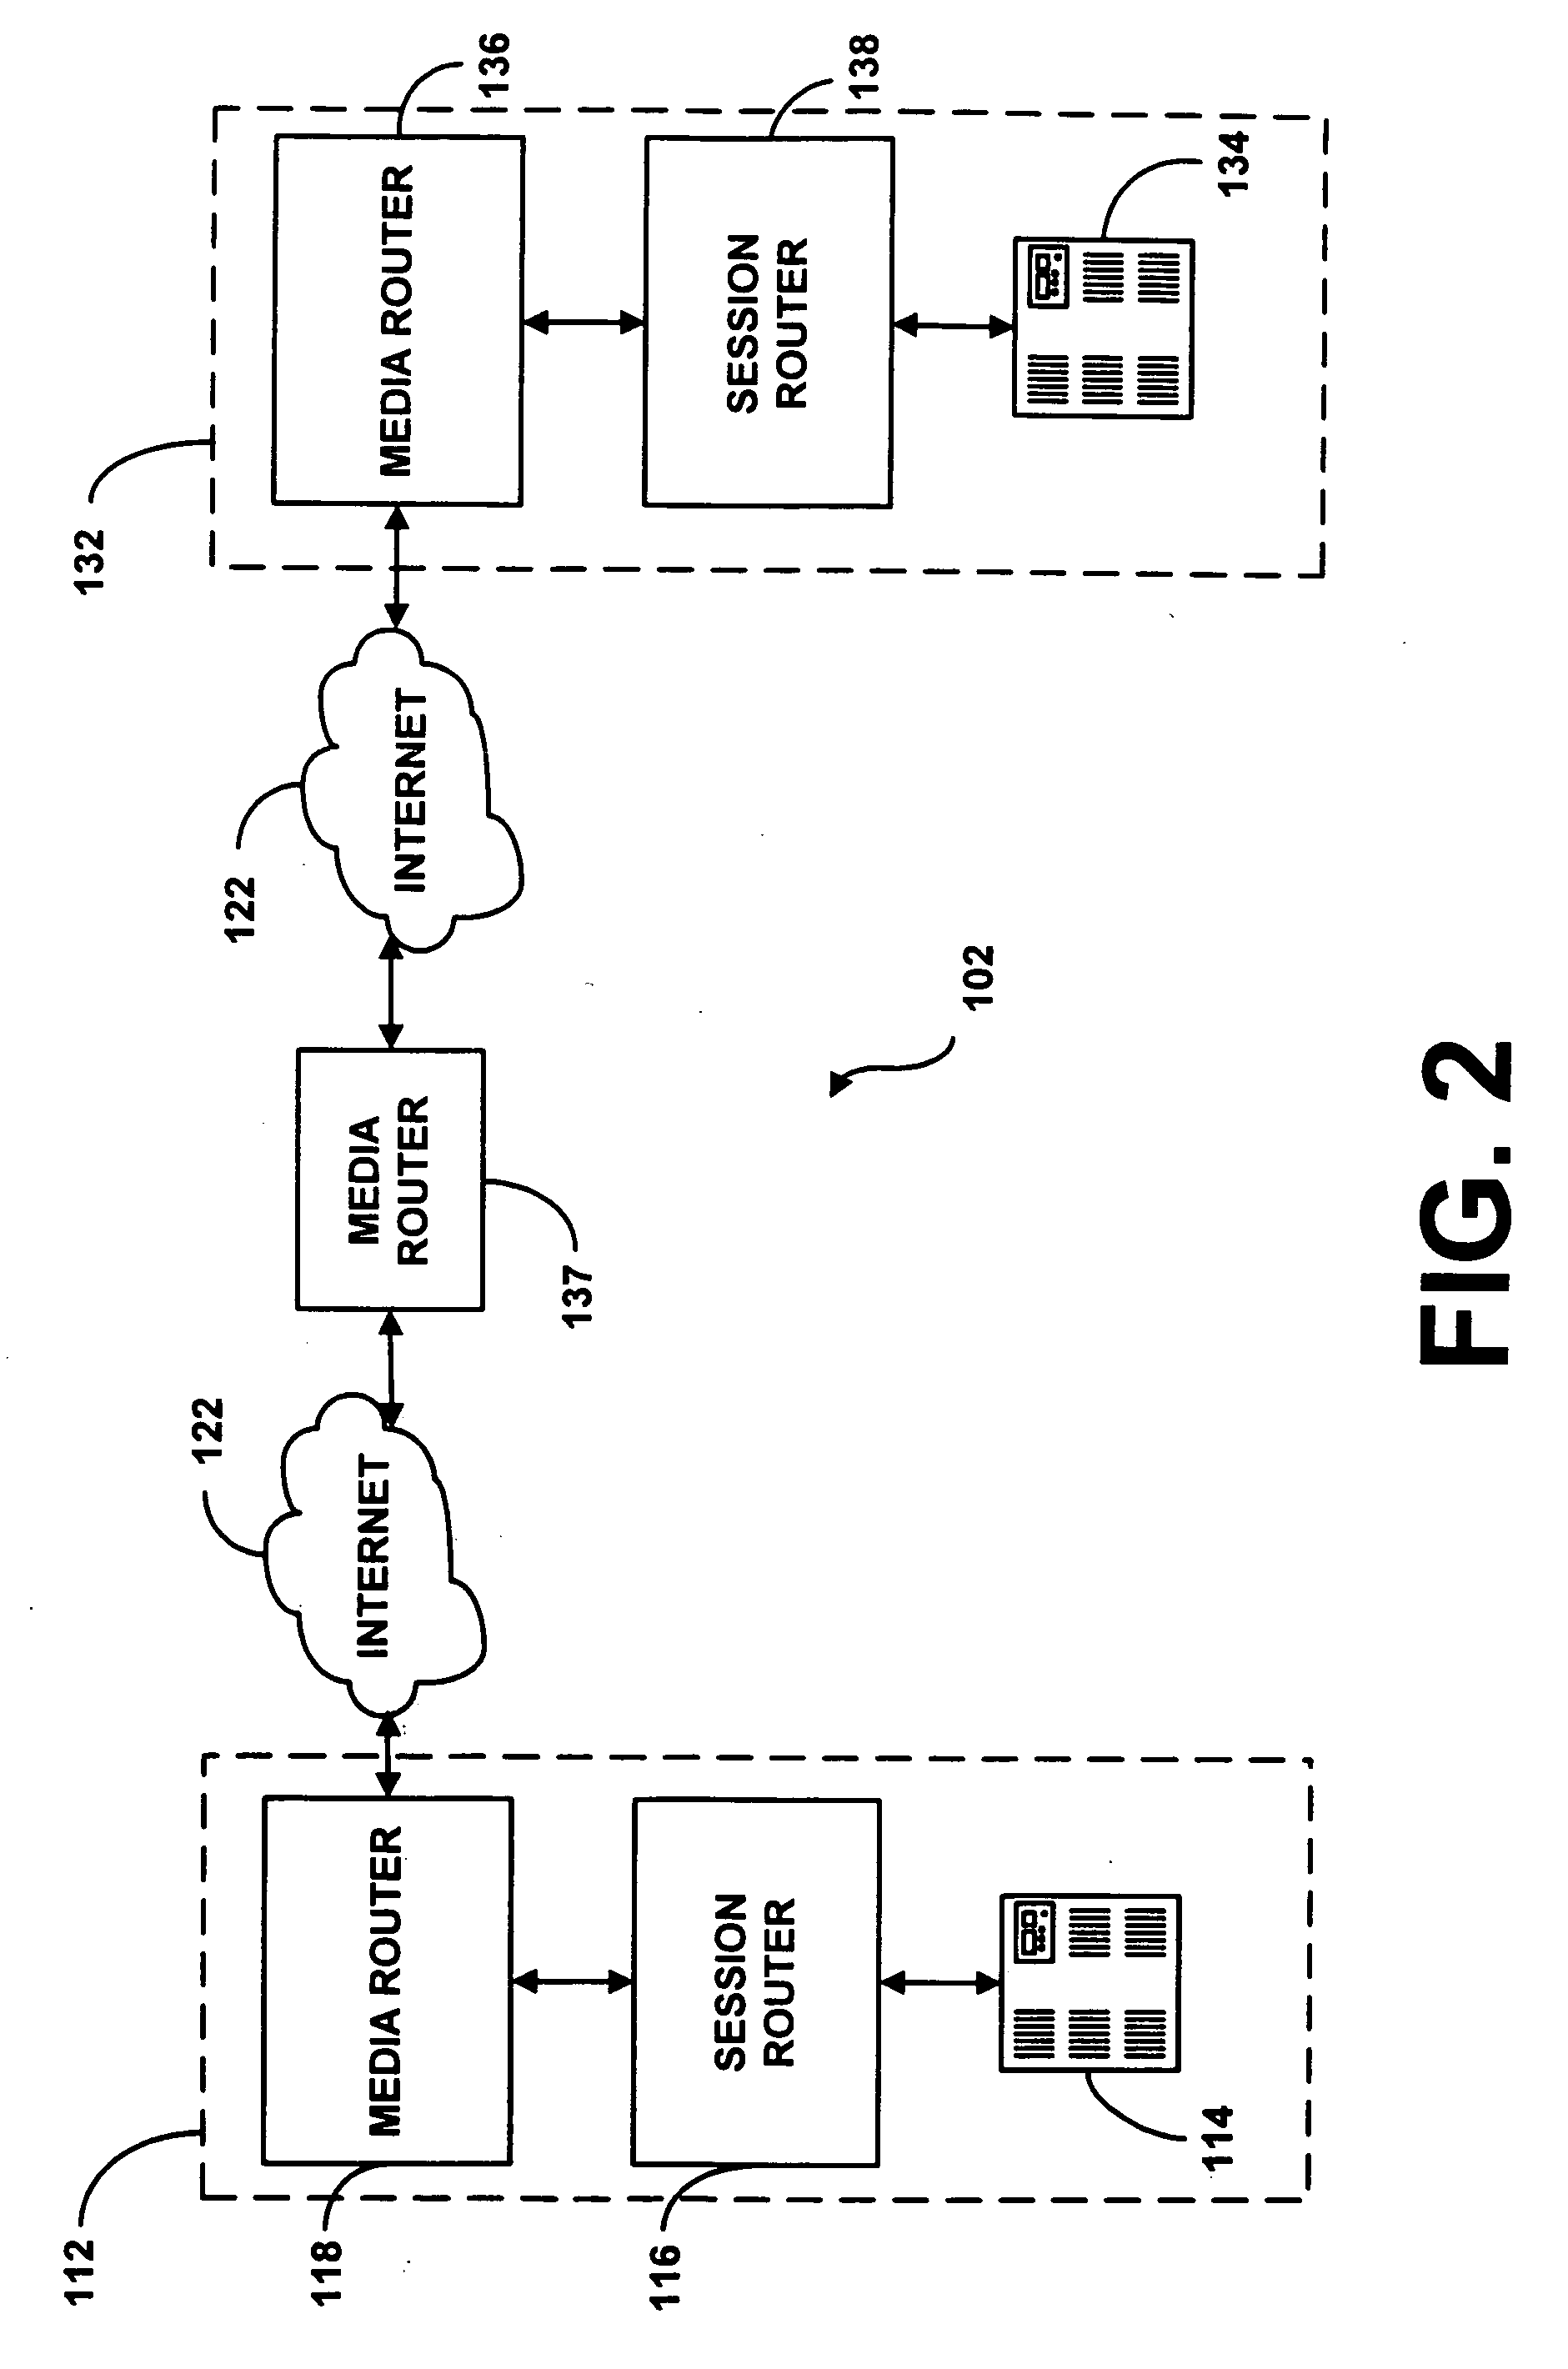 System and method for providing rapid rerouting of real-time multi-media flows